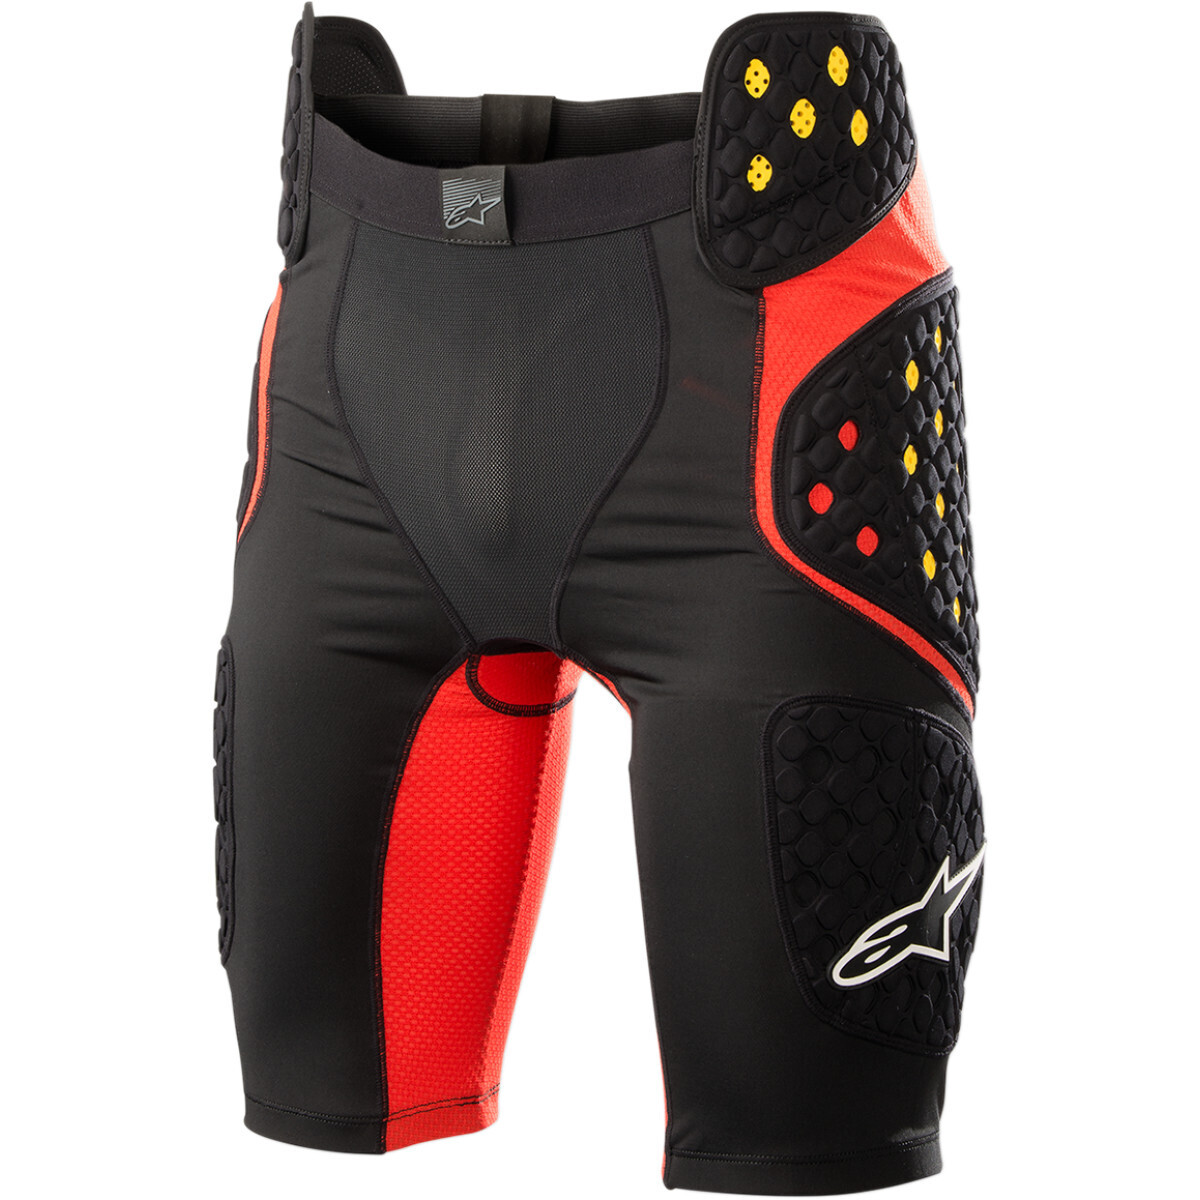 ALPINESTARS(MX)
SEQUENCE PRO PROTECTION SHORT BLACK/RED